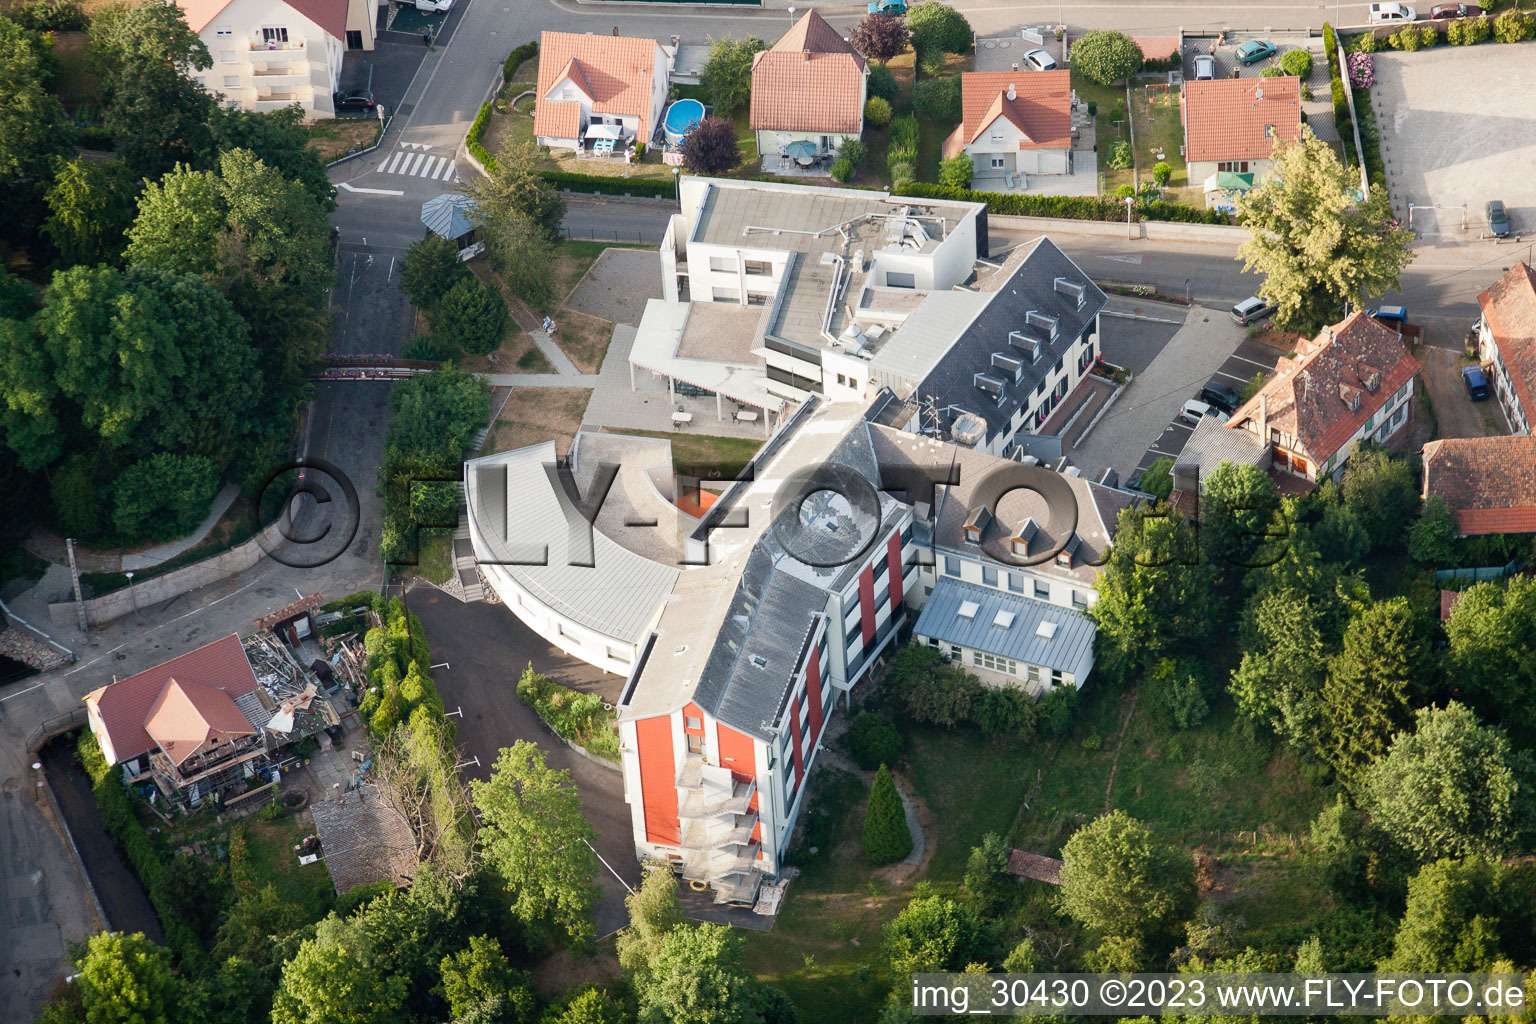 Bischwiller in the state Bas-Rhin, France seen from a drone